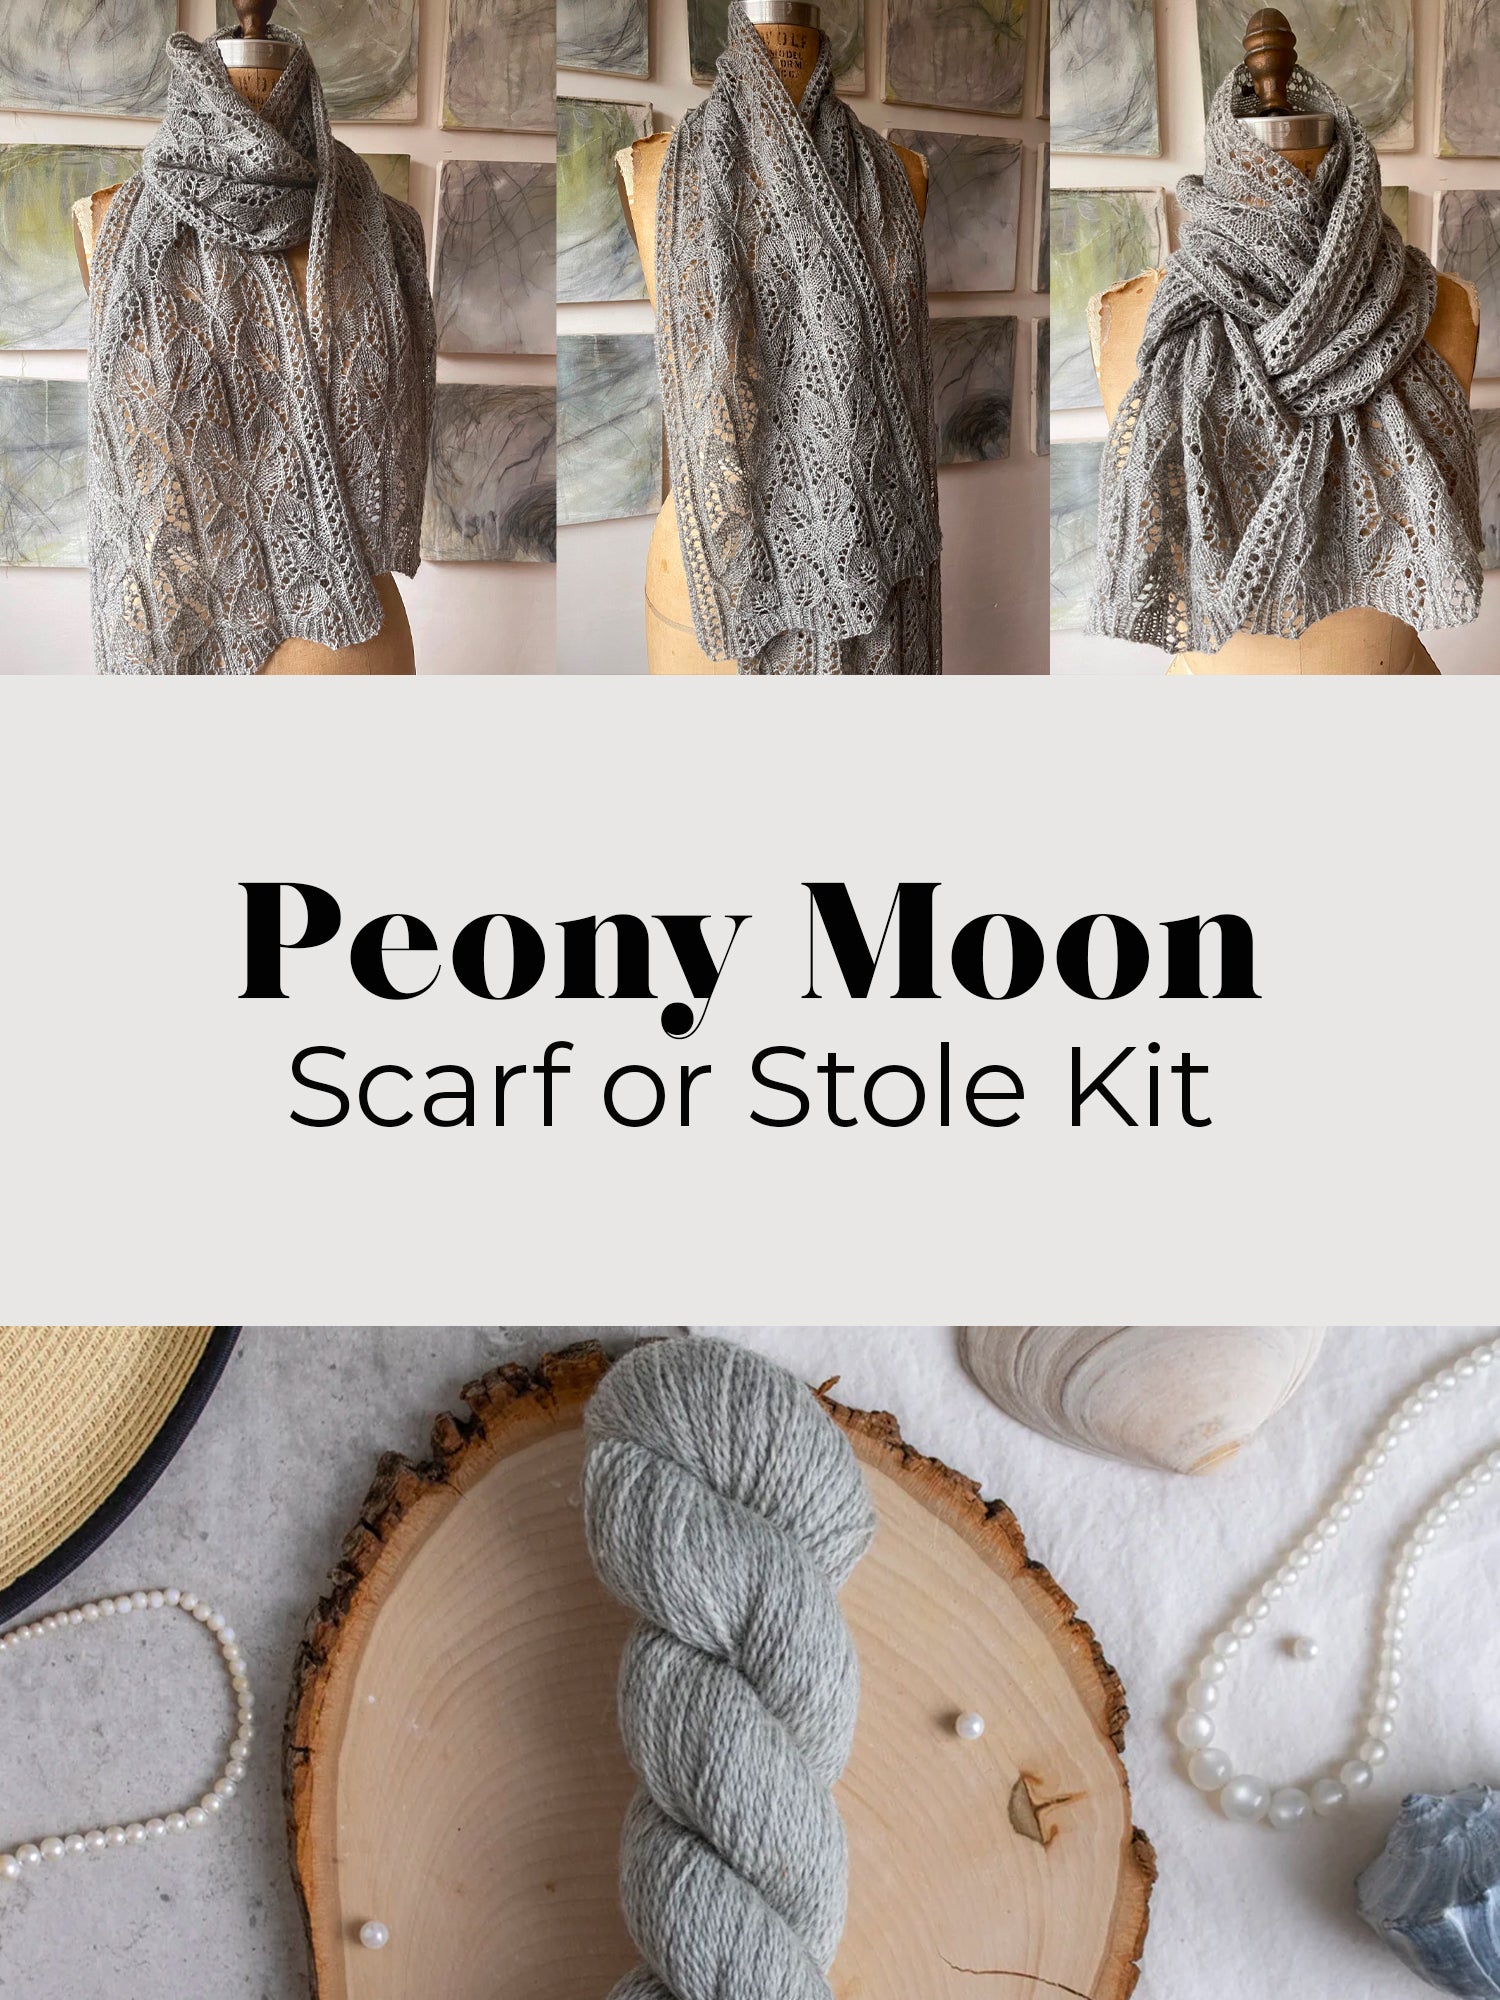 Peony Moon Scarf or Stole Kit